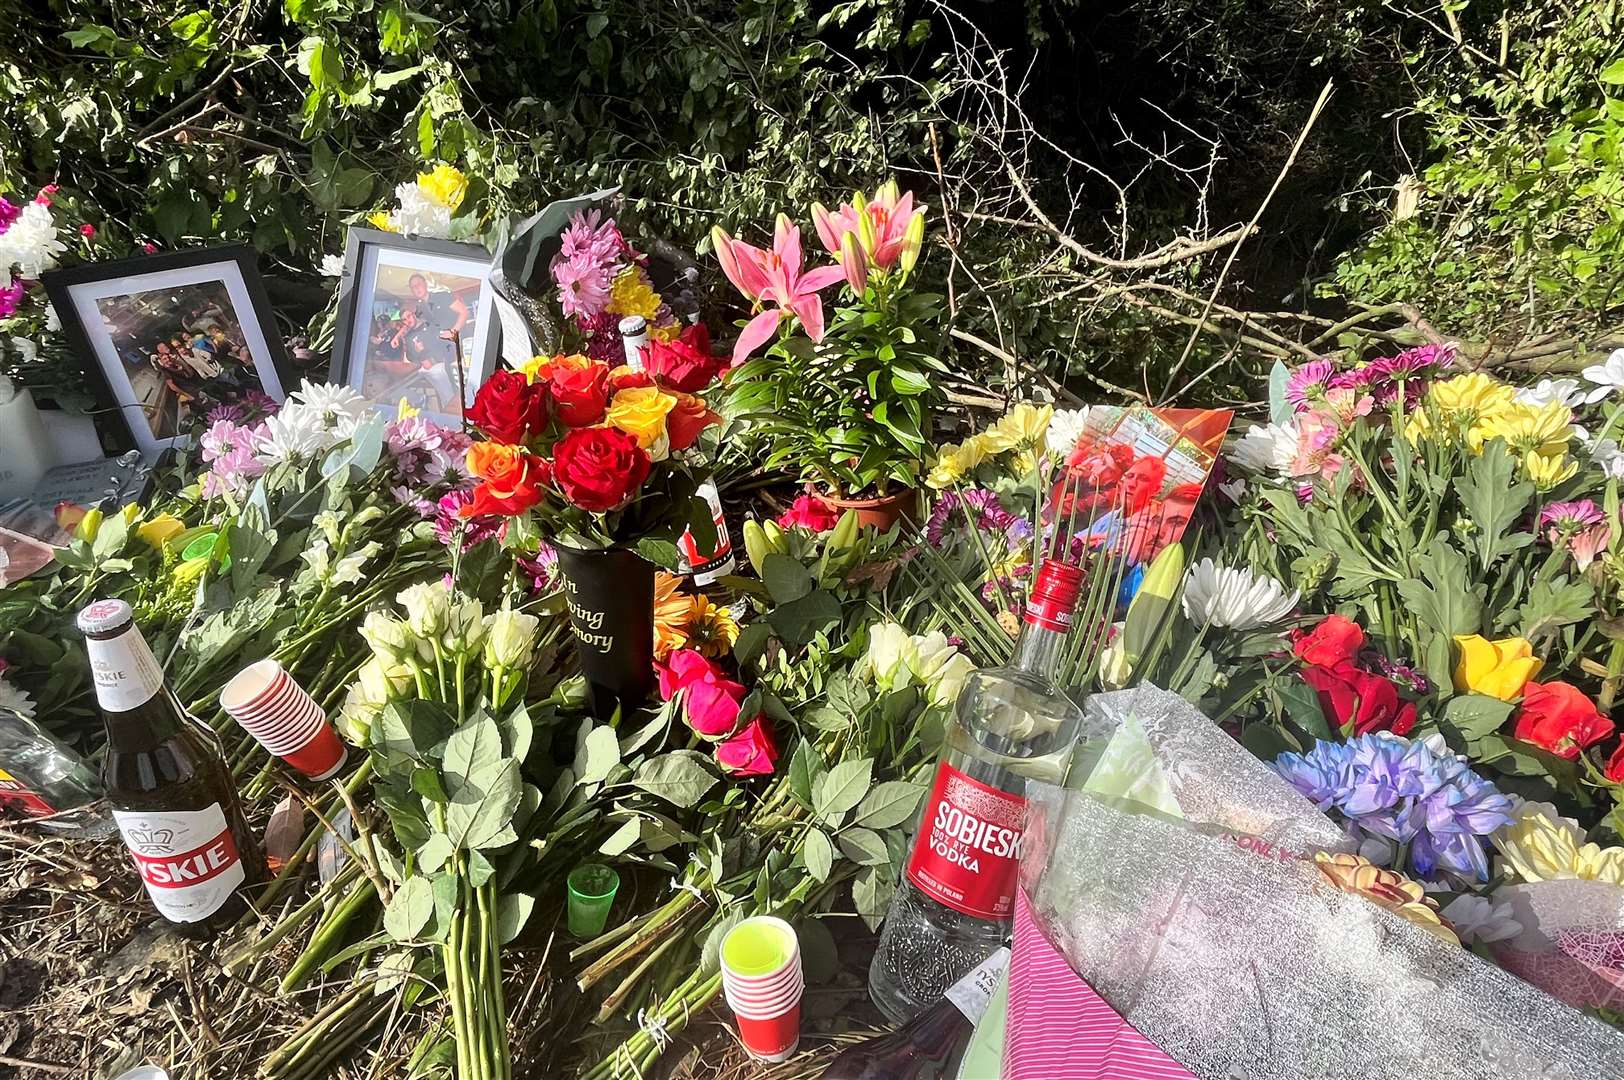 Tributes were left to Mati Tabaka at Flanders Field roundabout, where the fatal collision occurred